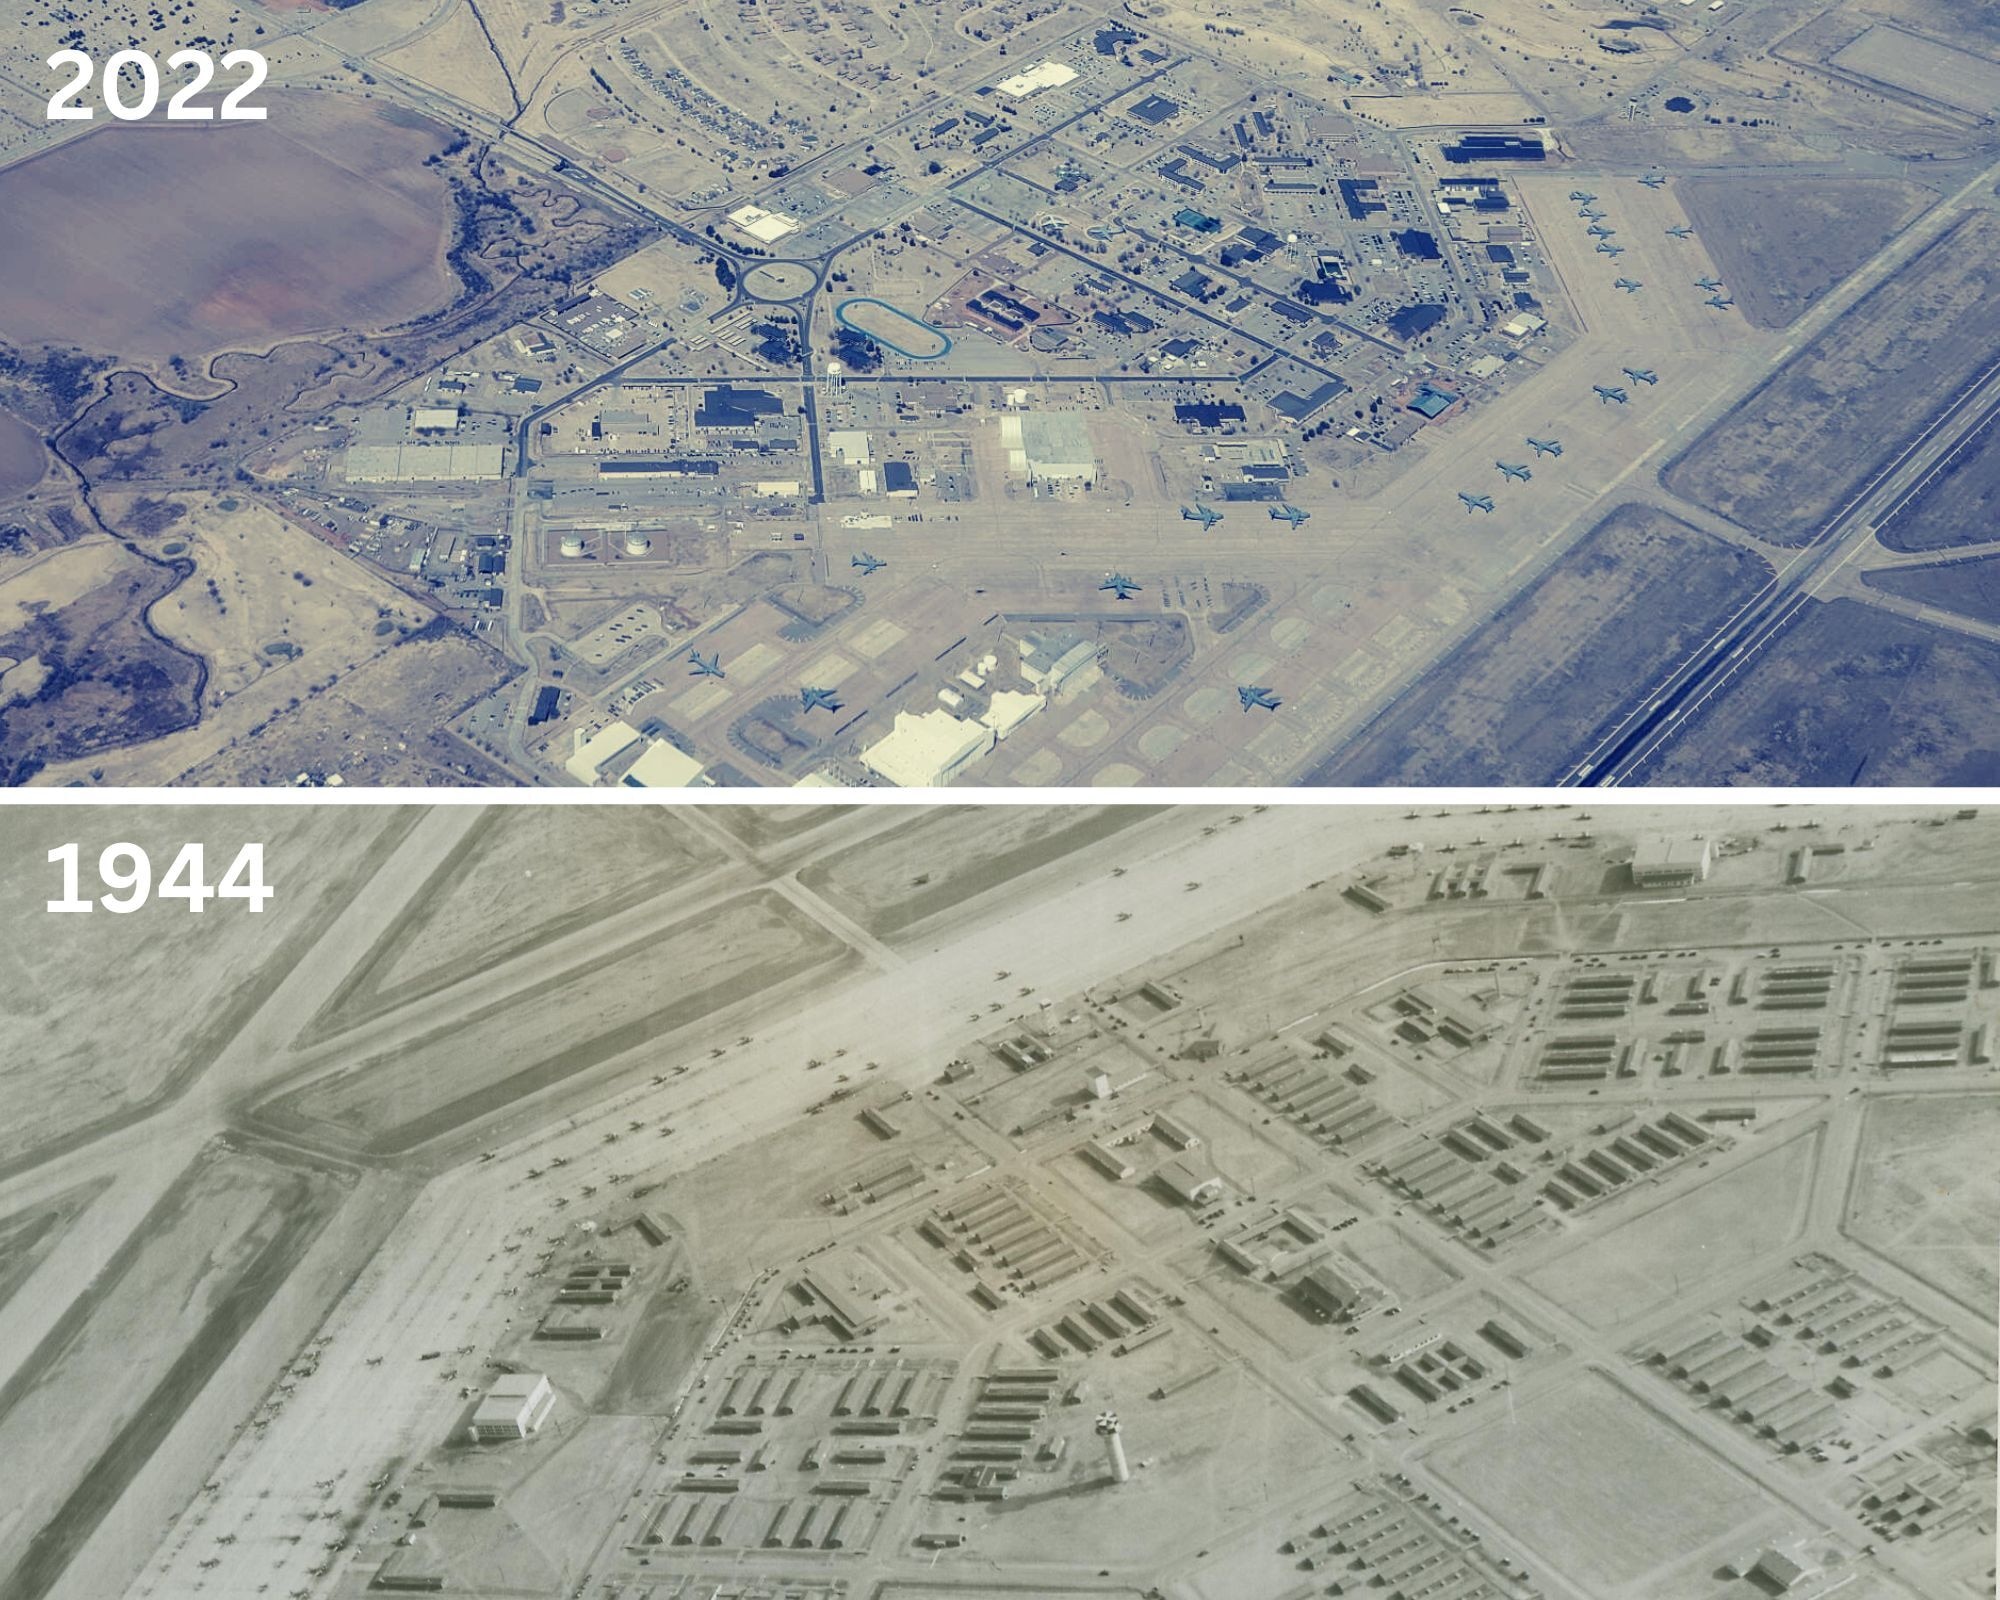 An overhead view of Altus Air Force Base, Oklahoma, 78 years apart. The construction of Altus Army Airfield began in the Spring of 1942, eventually opening Jan. 1, 1943. (U.S. Air Force illustration by Senior Airman Trenton Jancze)